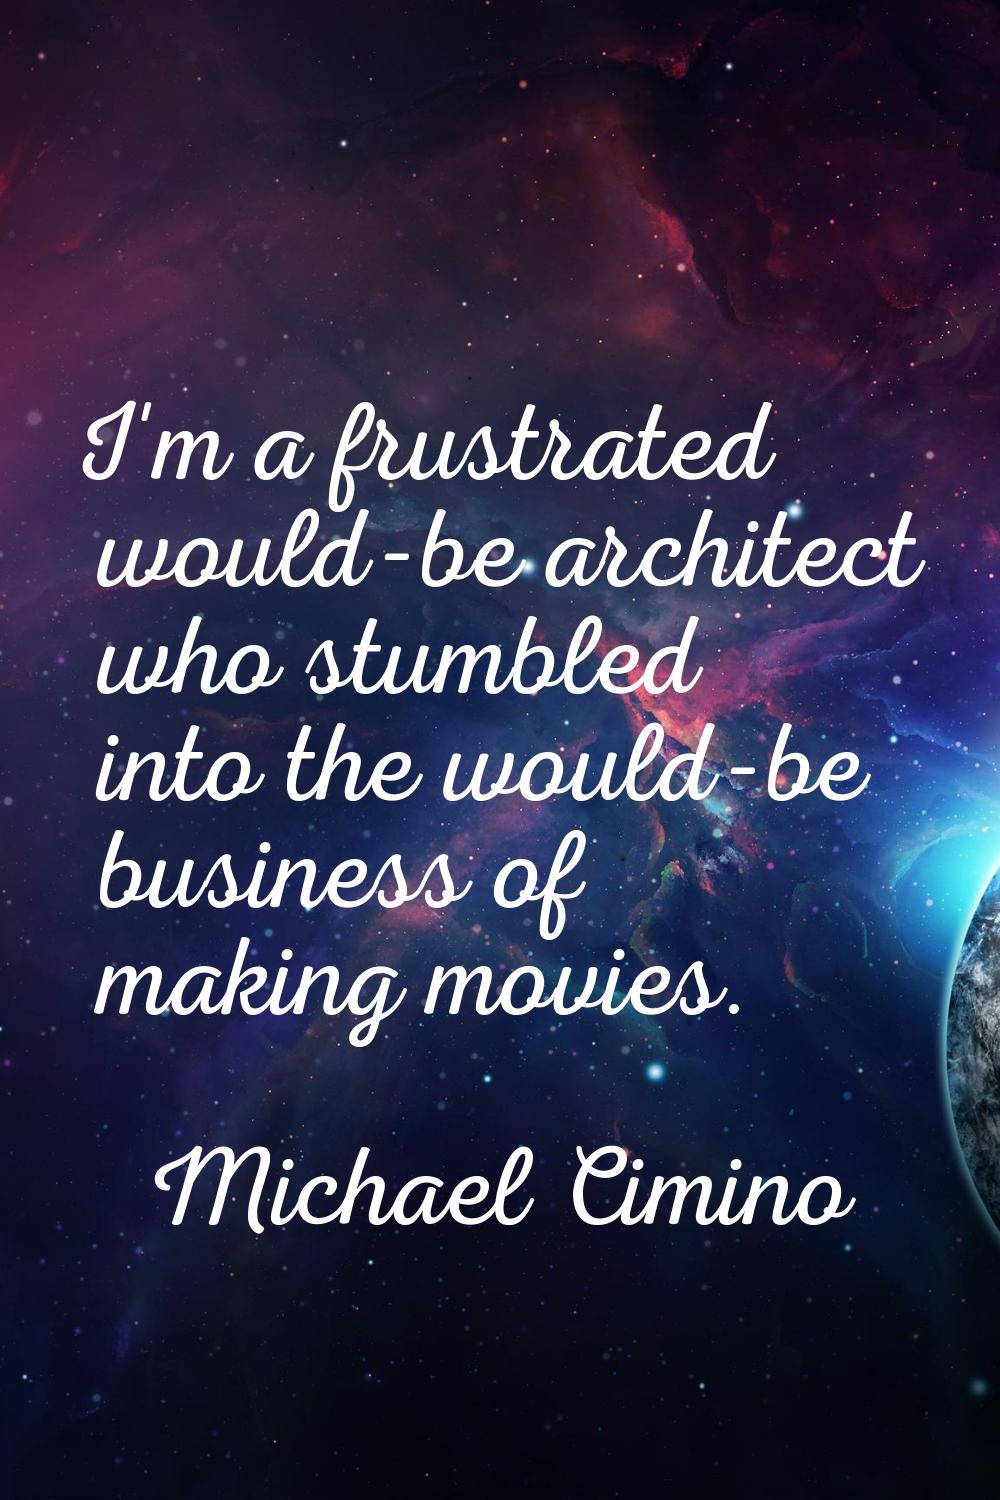 I'm a frustrated would-be architect who stumbled into the would-be business of making movies.